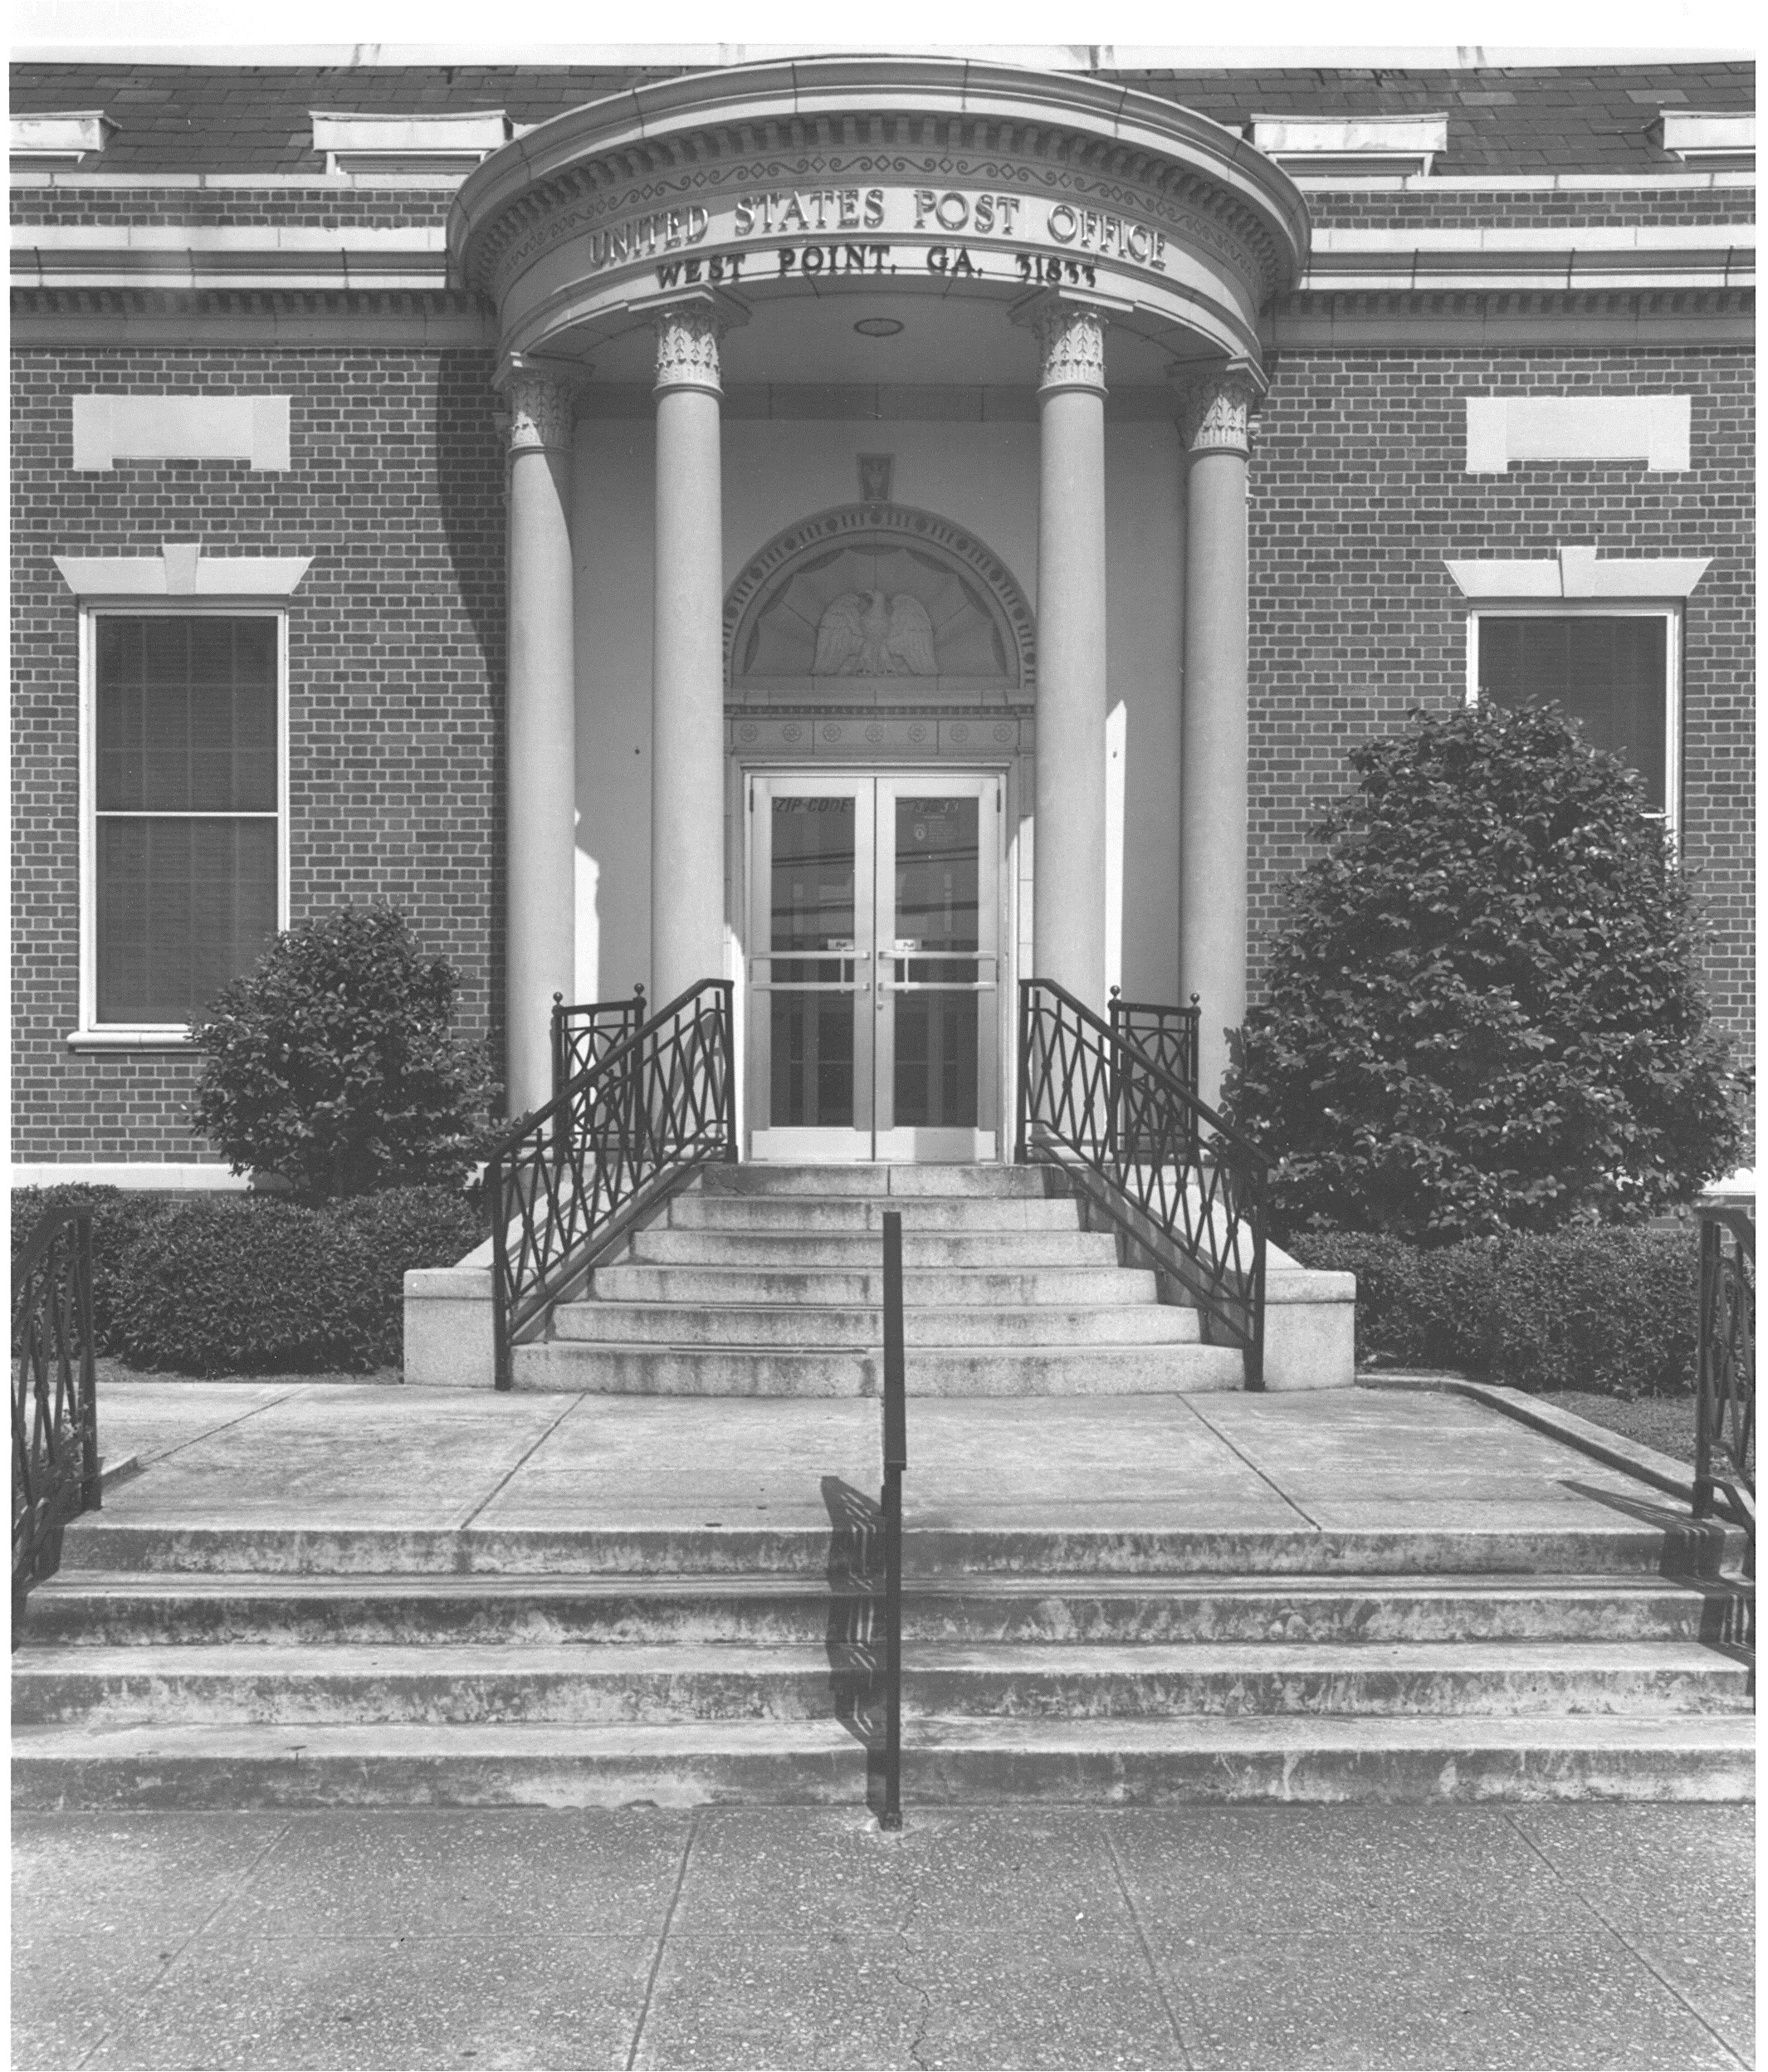 Historical image of West Point, GA's Post Office provided by Troup County Archives